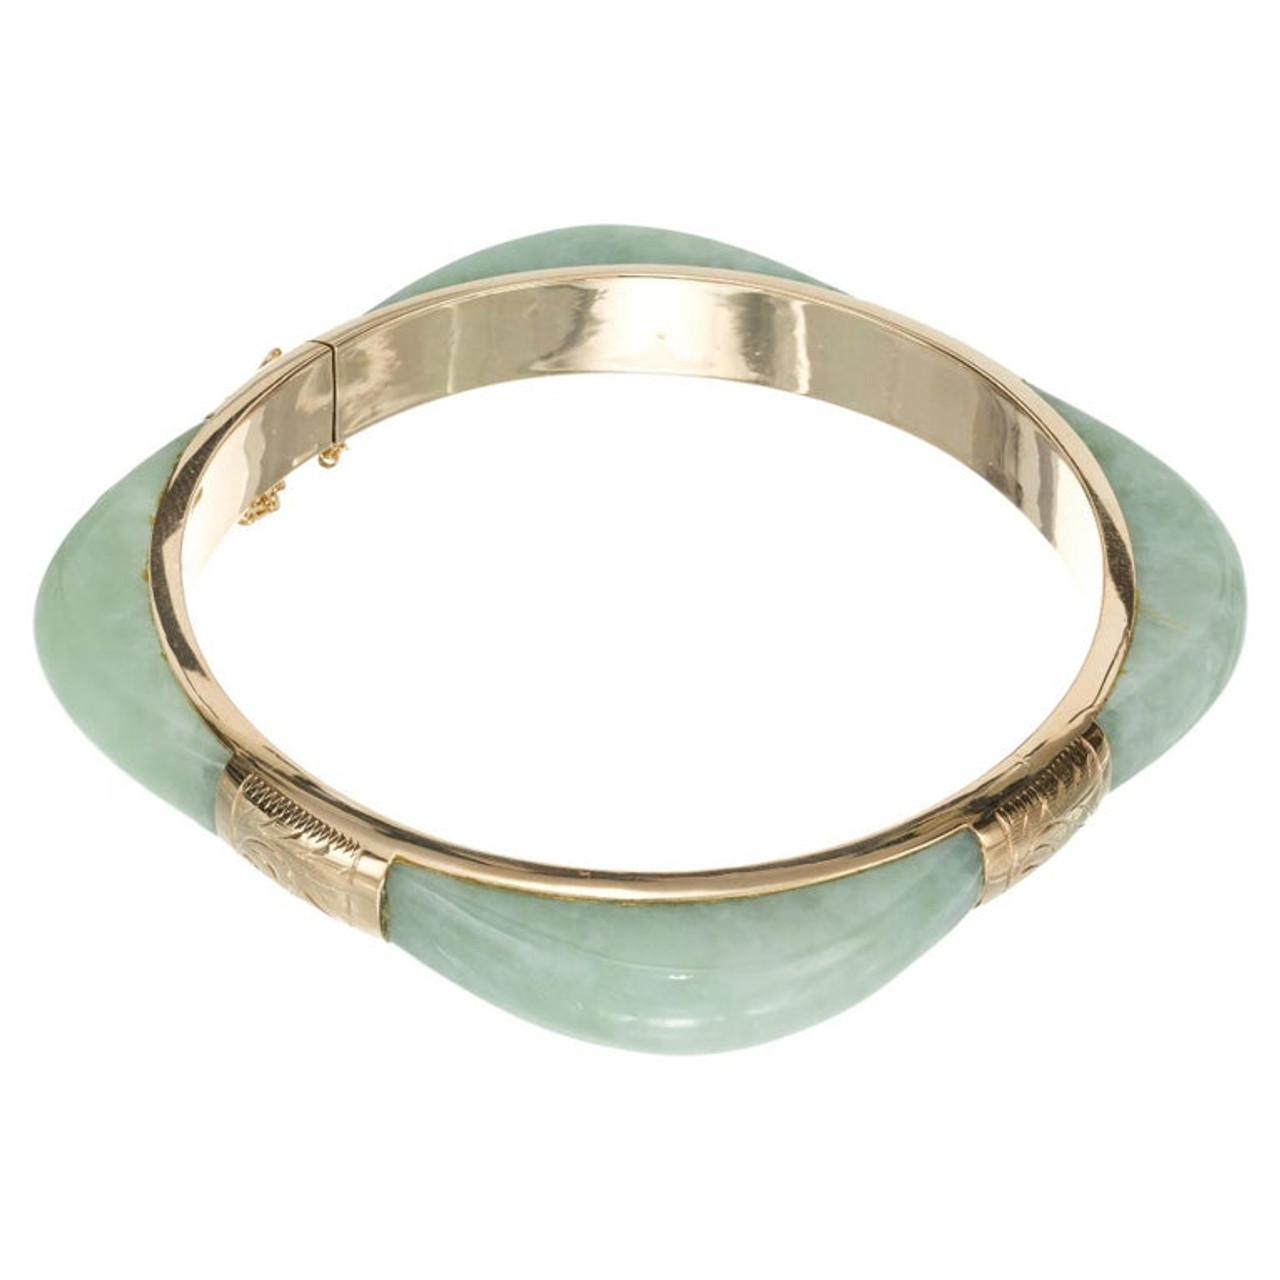 22ct Yellow Gold and Jade Bracelet with Safety Chain – Eloise Jewellery